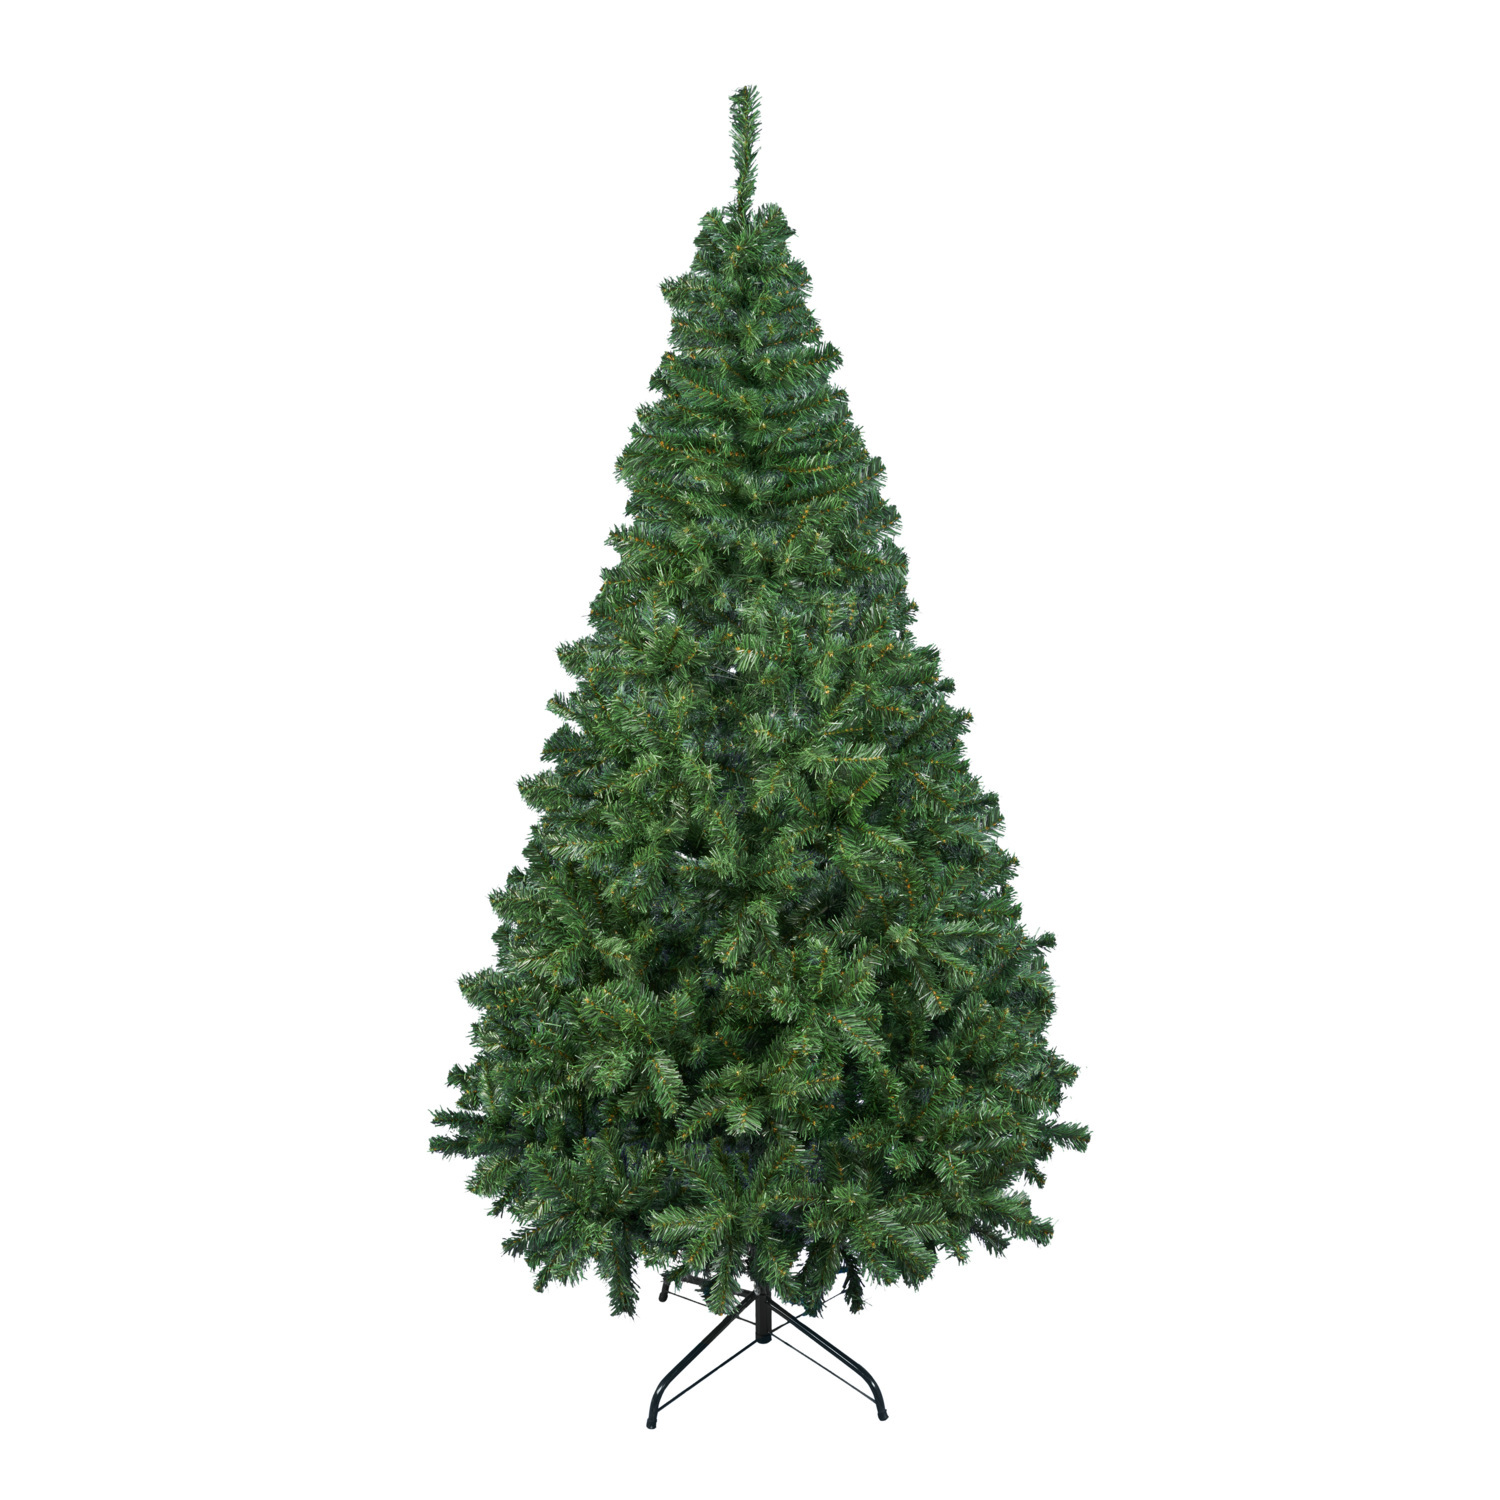 Norway Spruce Artifical Christmas Tree 6ft Image 2